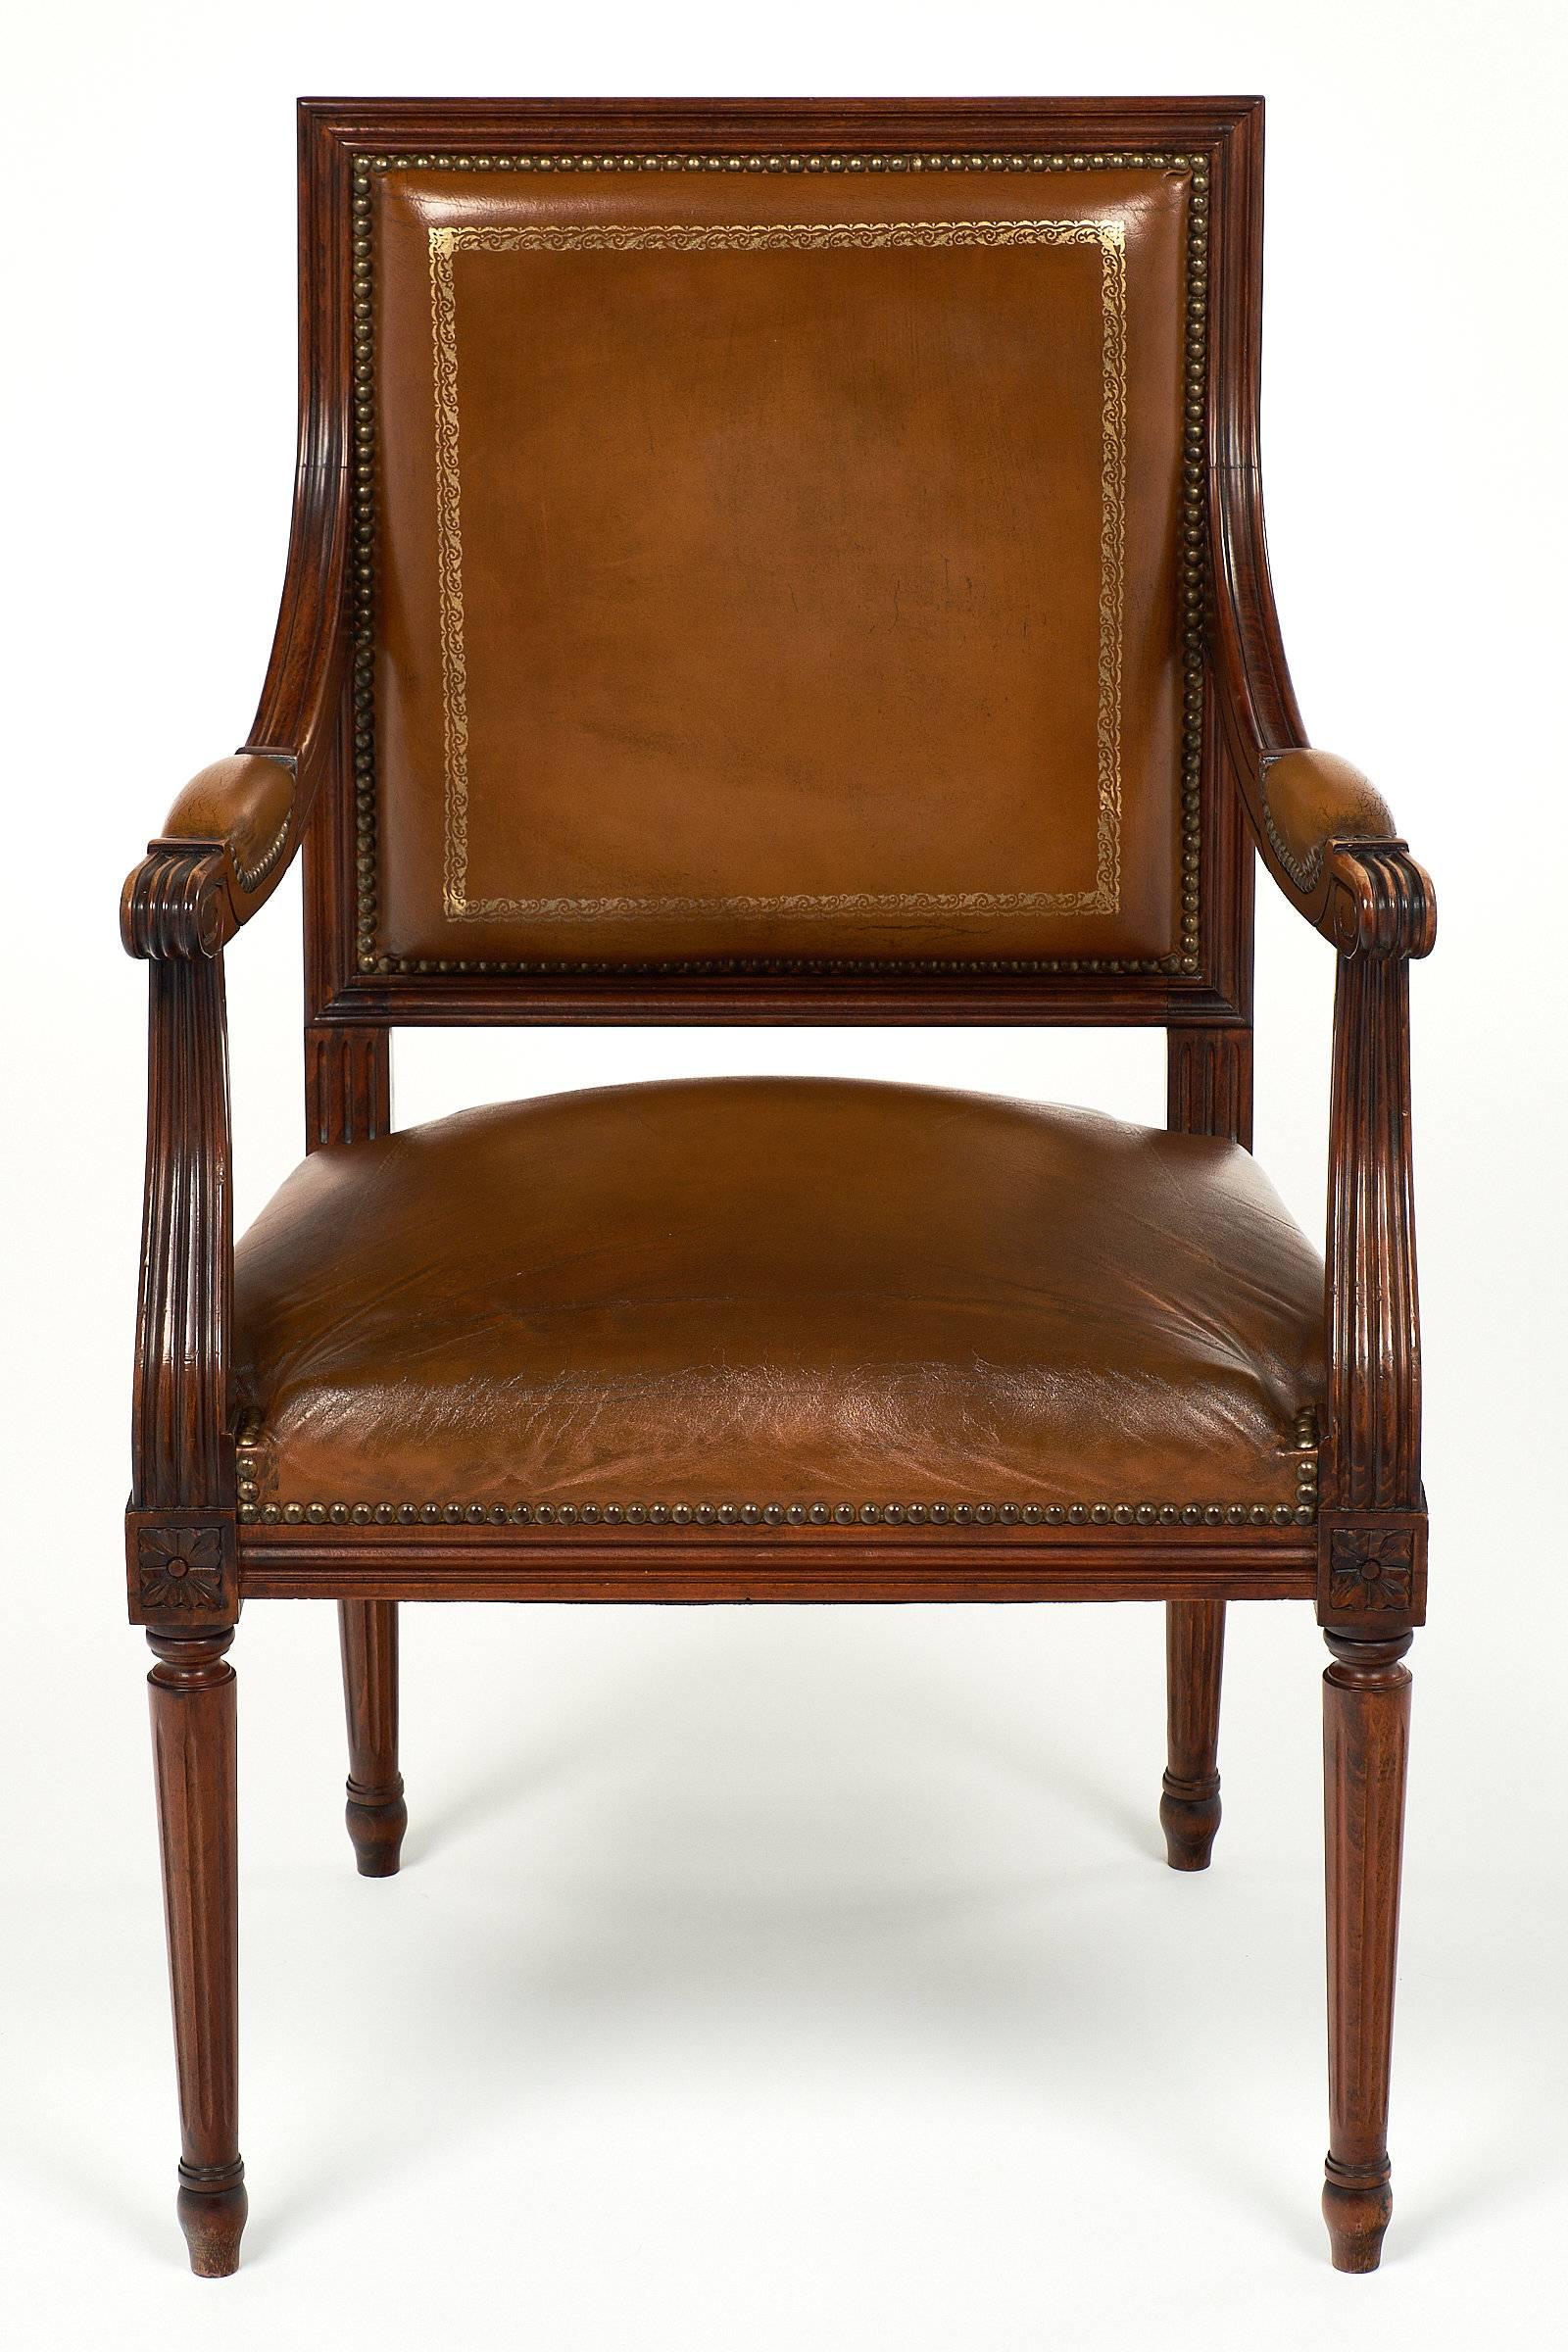 Handsome armchair in the Louis XVI style. This piece has a hand-carved and fluted mahogany frame with beautiful scroll details on the arms. The four legs are fluted and tapered. The chair has the original leather upholstery with gold-leaf frieze